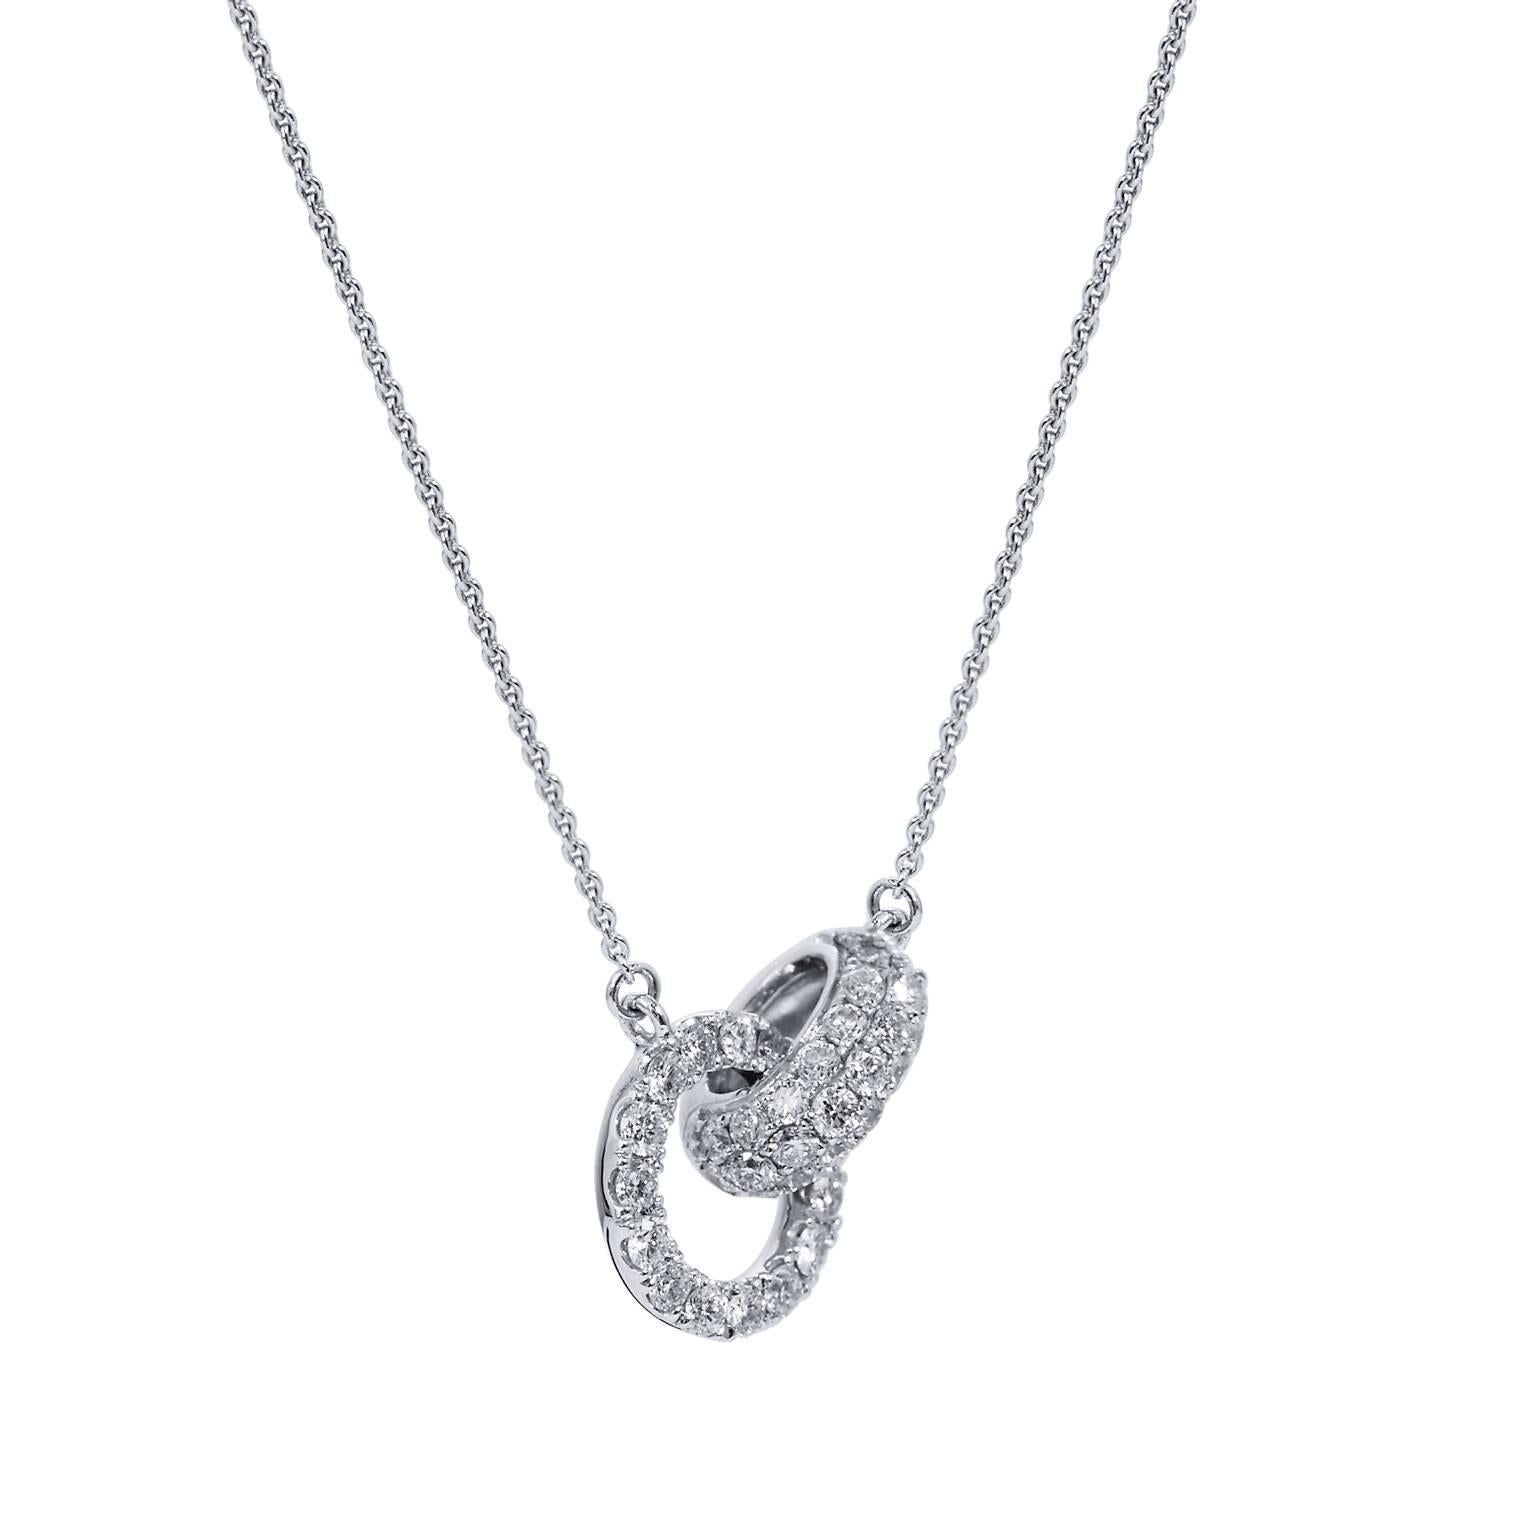 Two 18 karat white gold rings featuring 0.43 carat of pave set diamond (G/H/VS), interlock to form a charming pendant necklace.